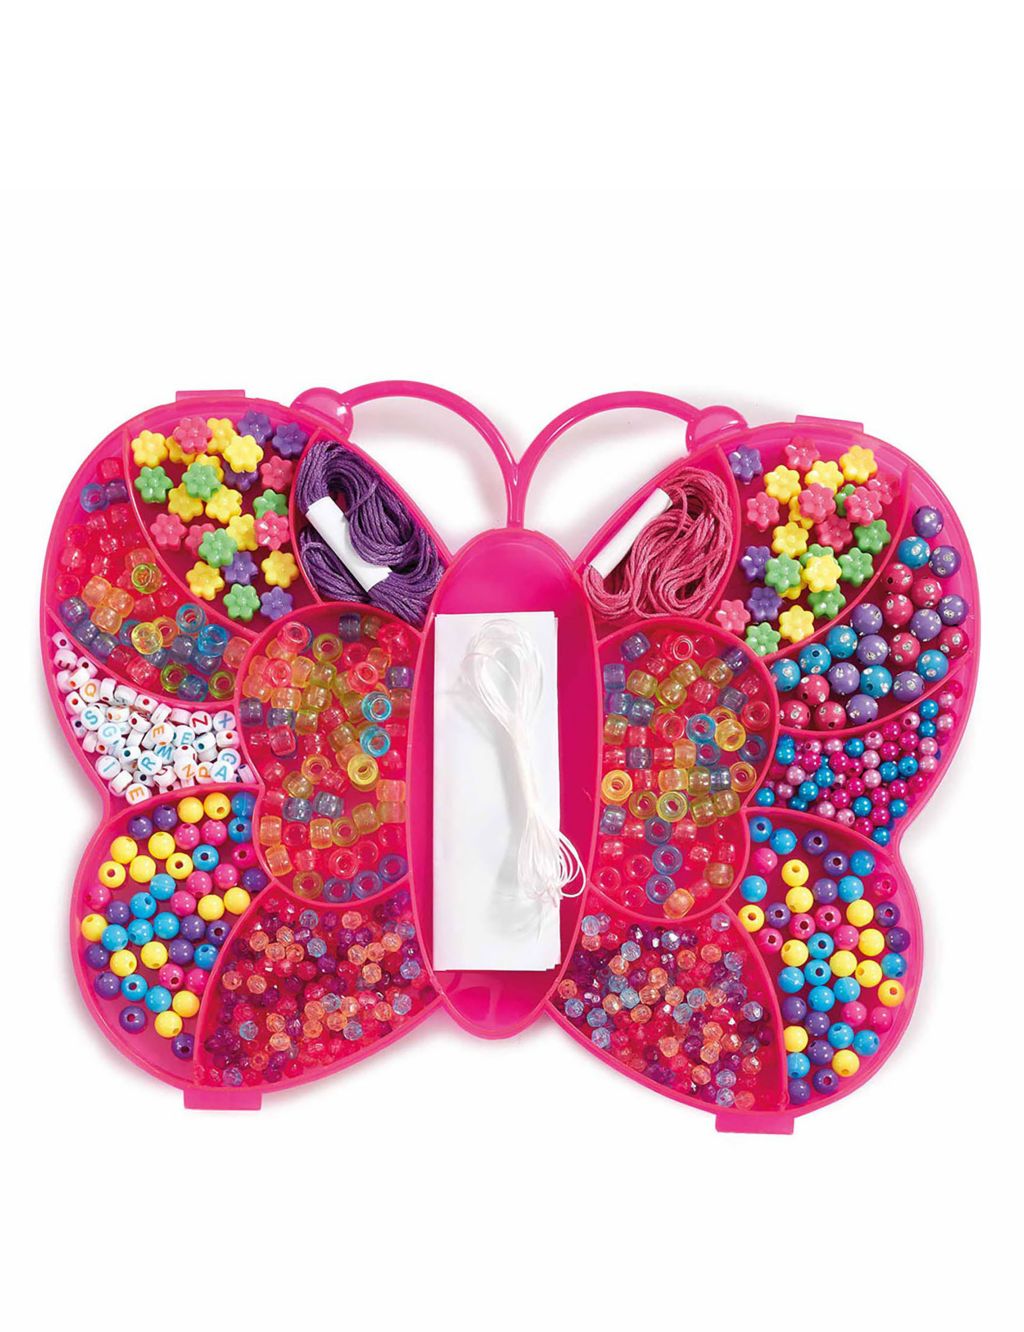 Butterfly Bead Case (5-10 Yrs) image 2